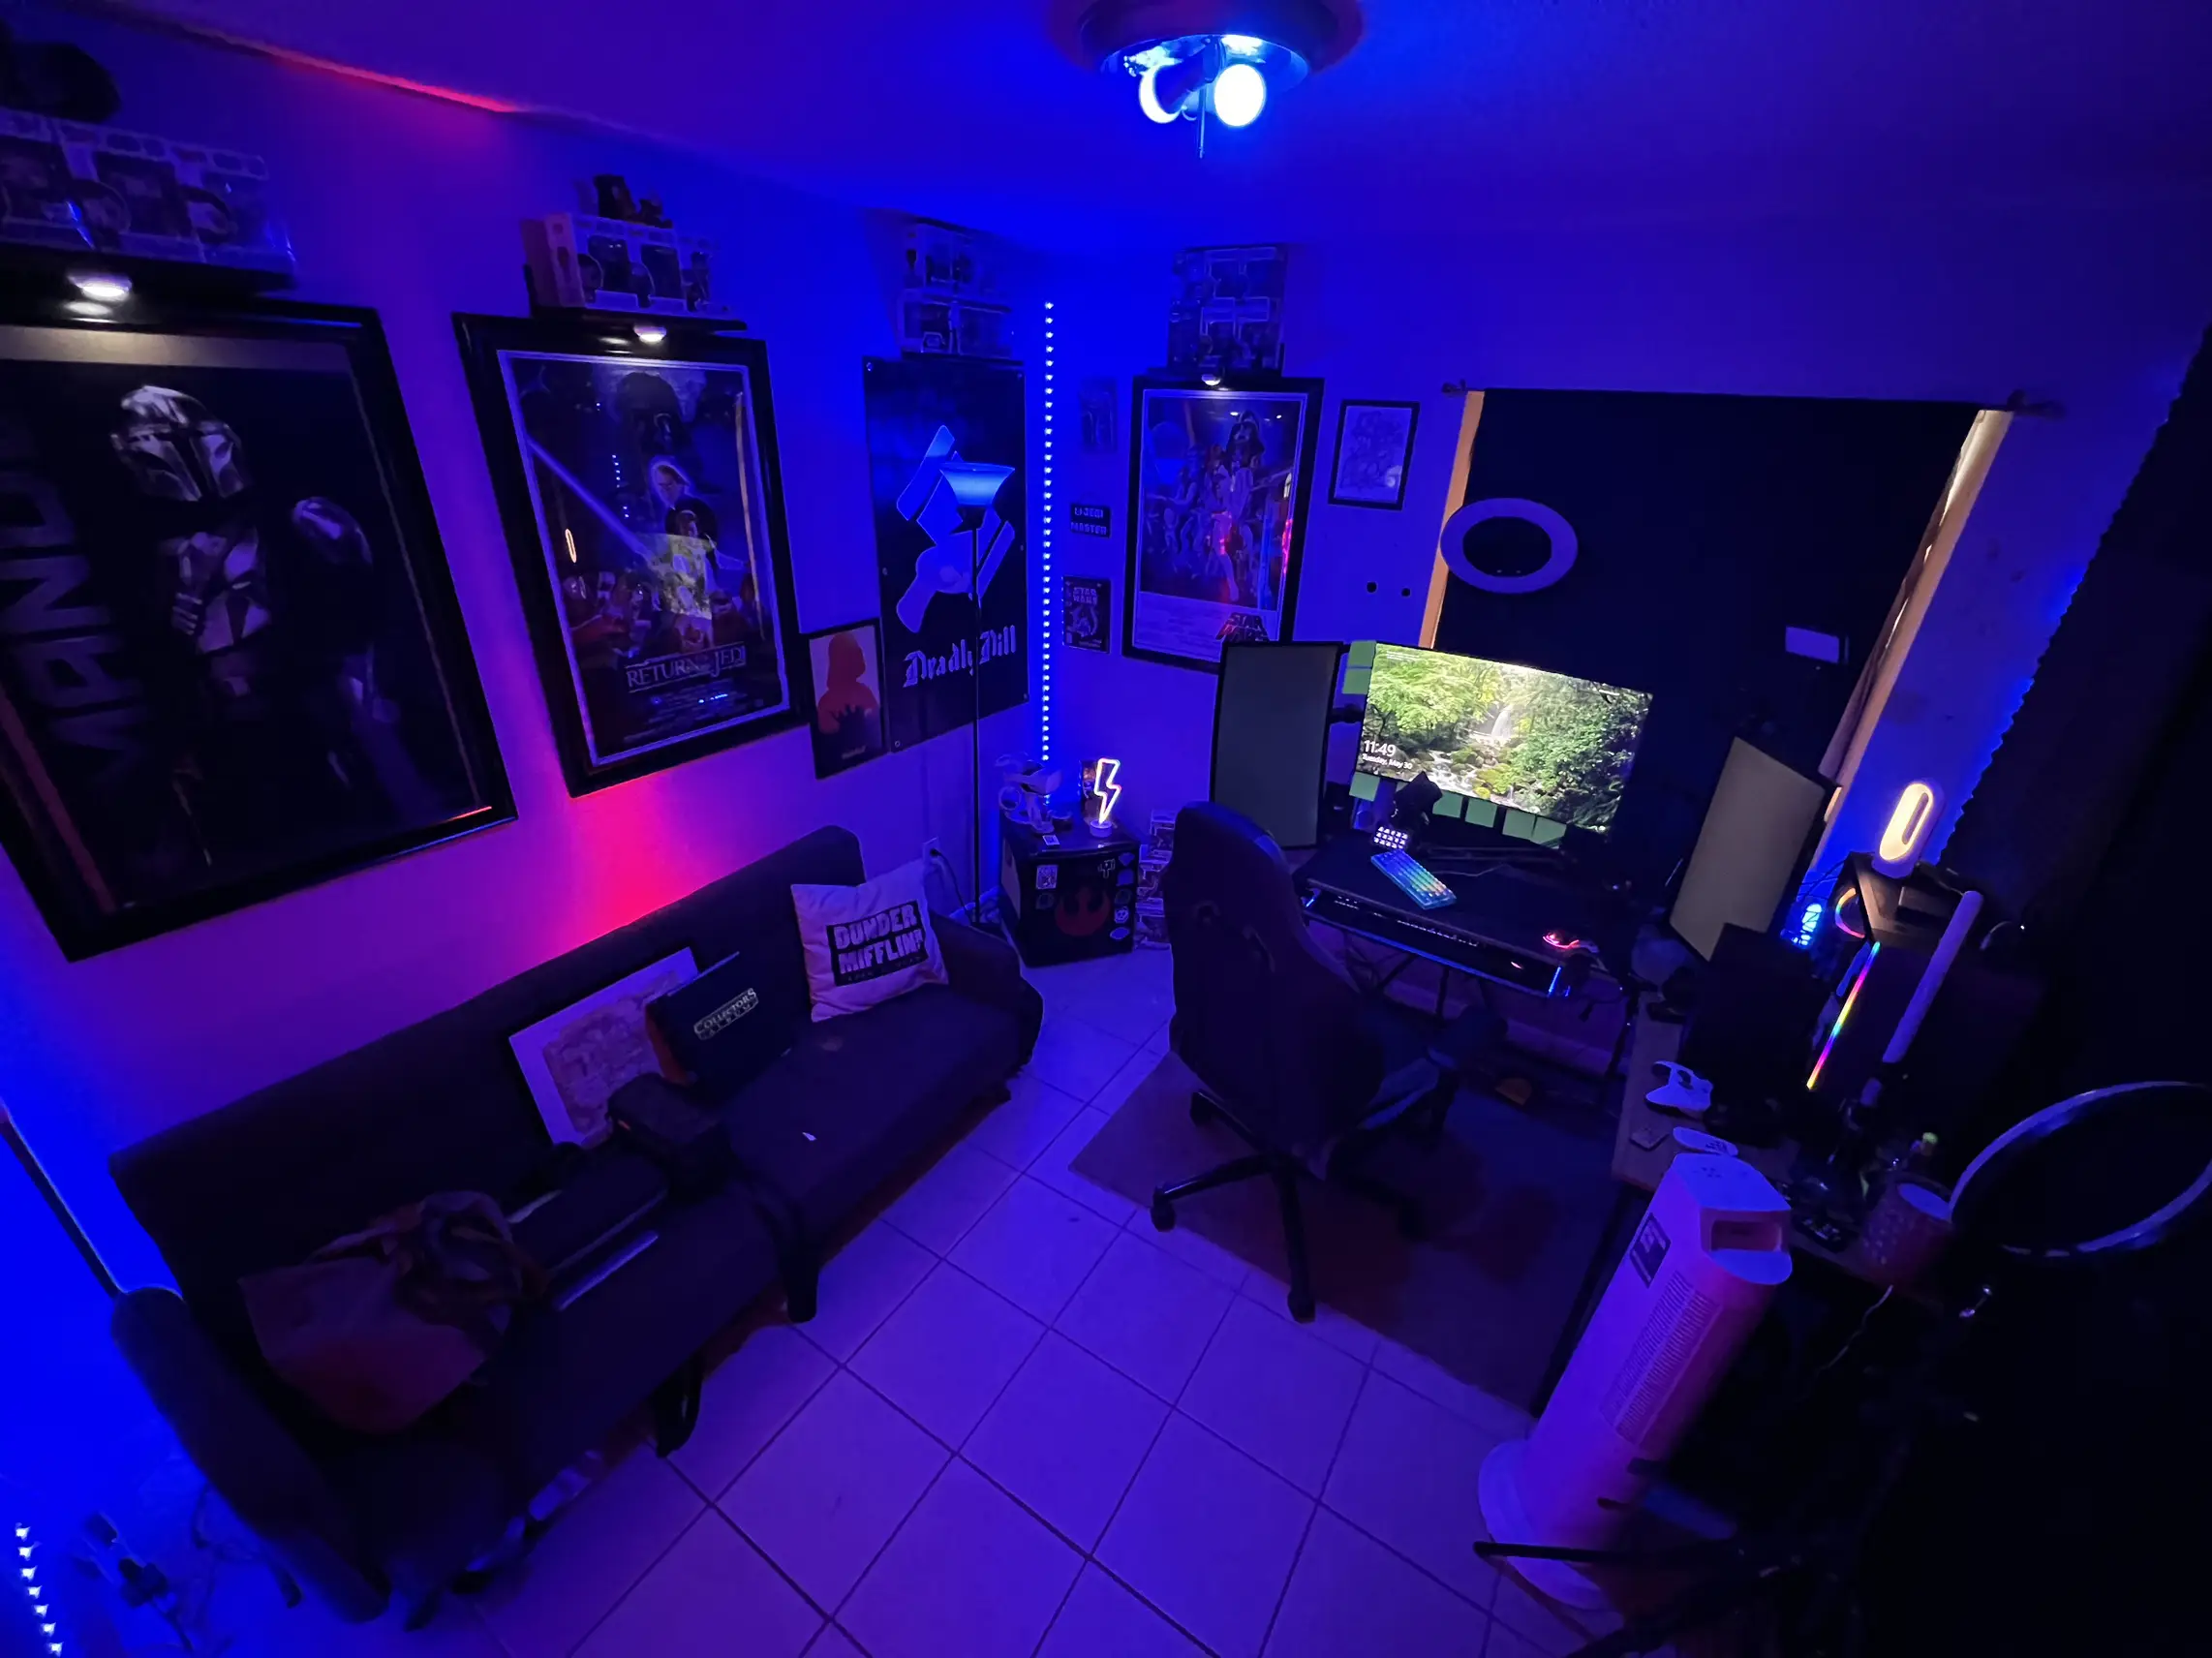 What a cool gaming setup idea 💖✨  Game room design, Gaming room setup,  Game room decor